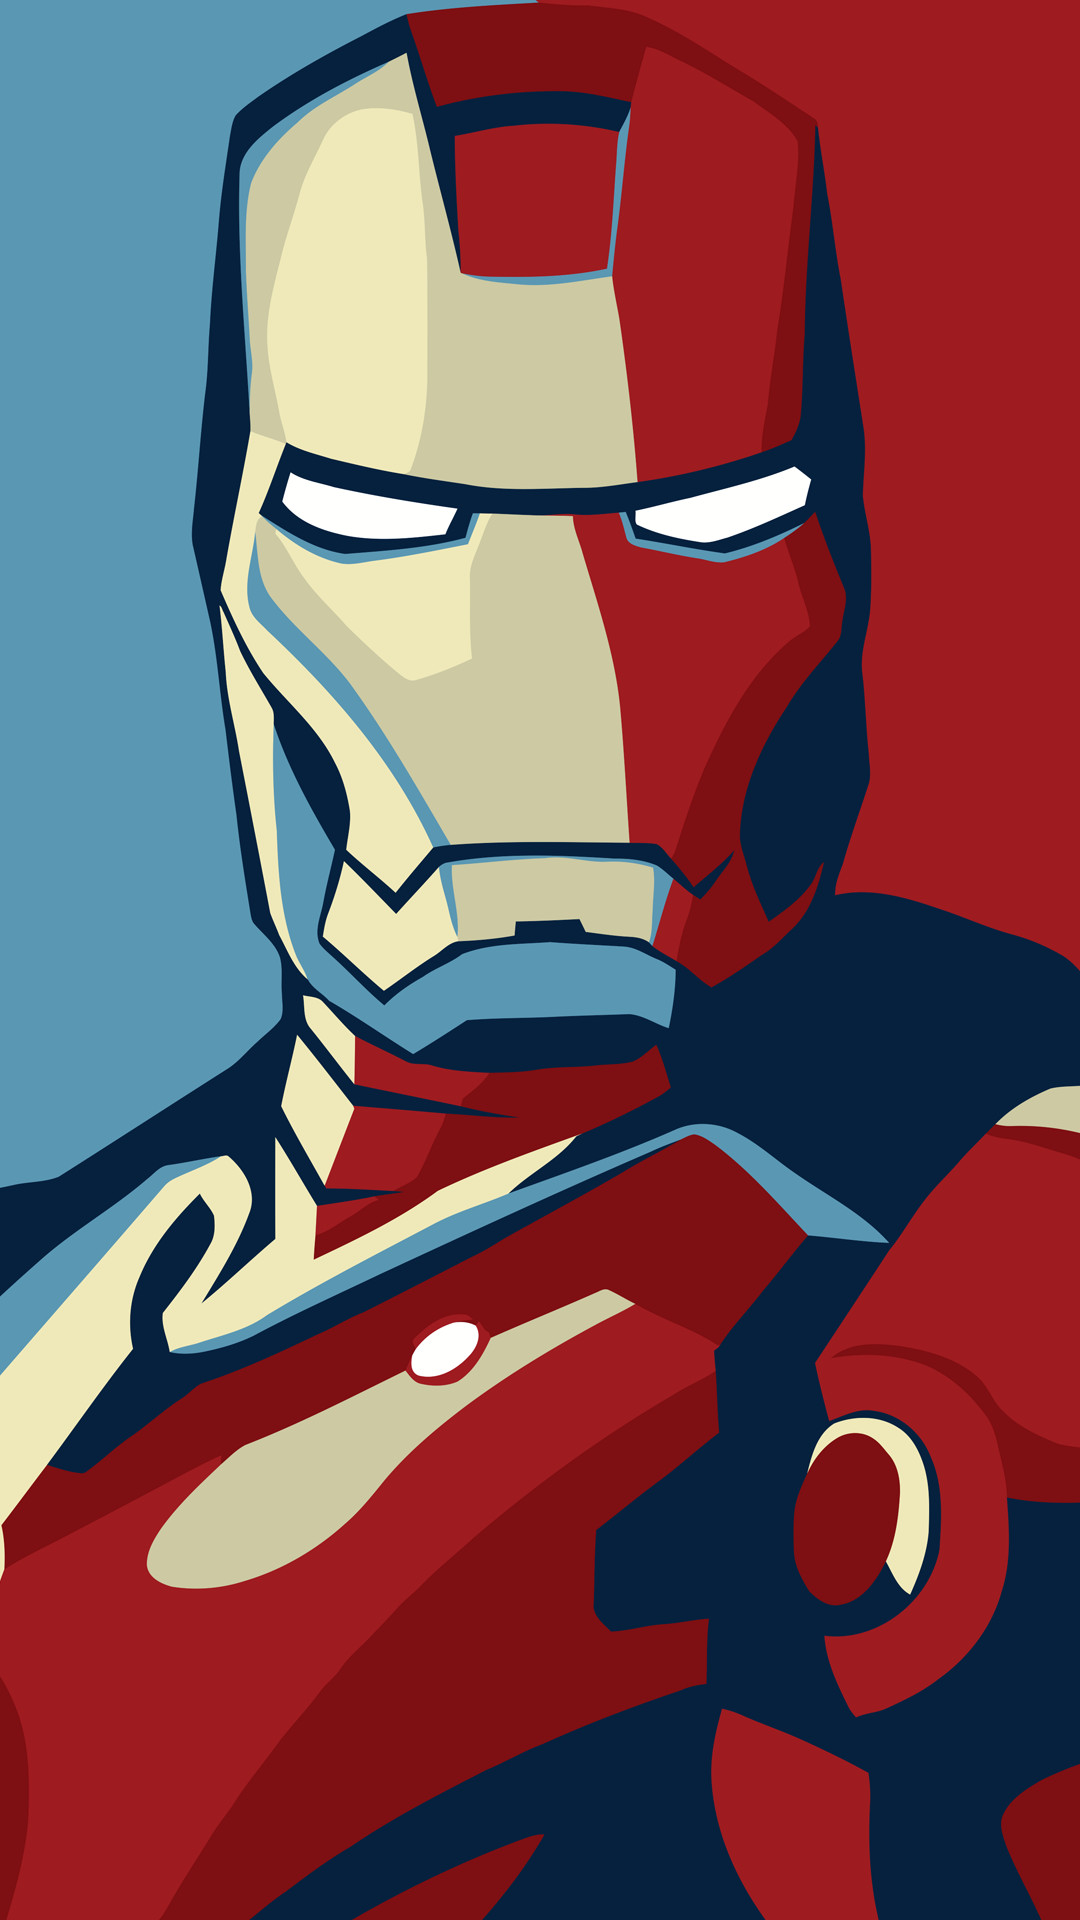 1080x1920 Wallpaper Iron Man Collection For Free Download